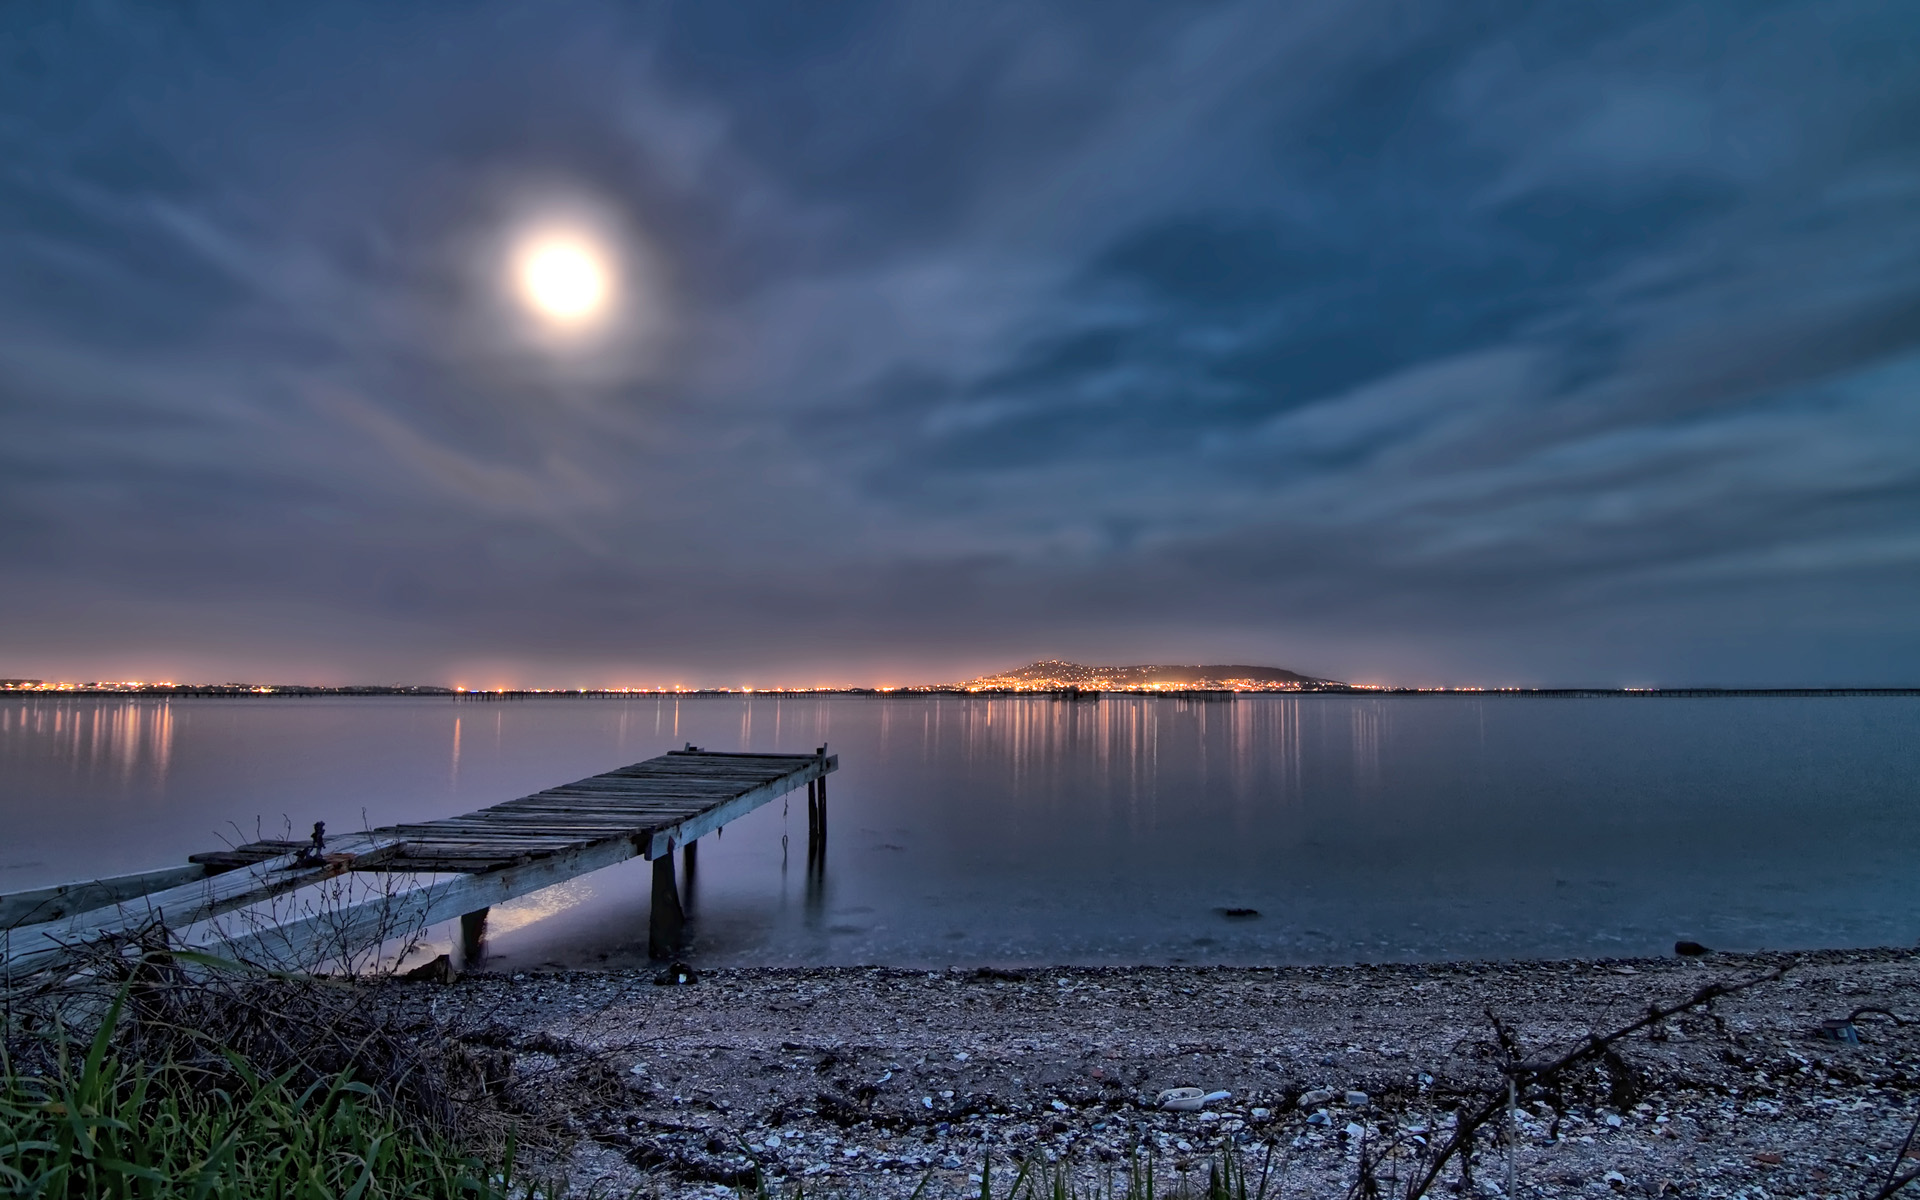 Moonlit night on a dock by the water